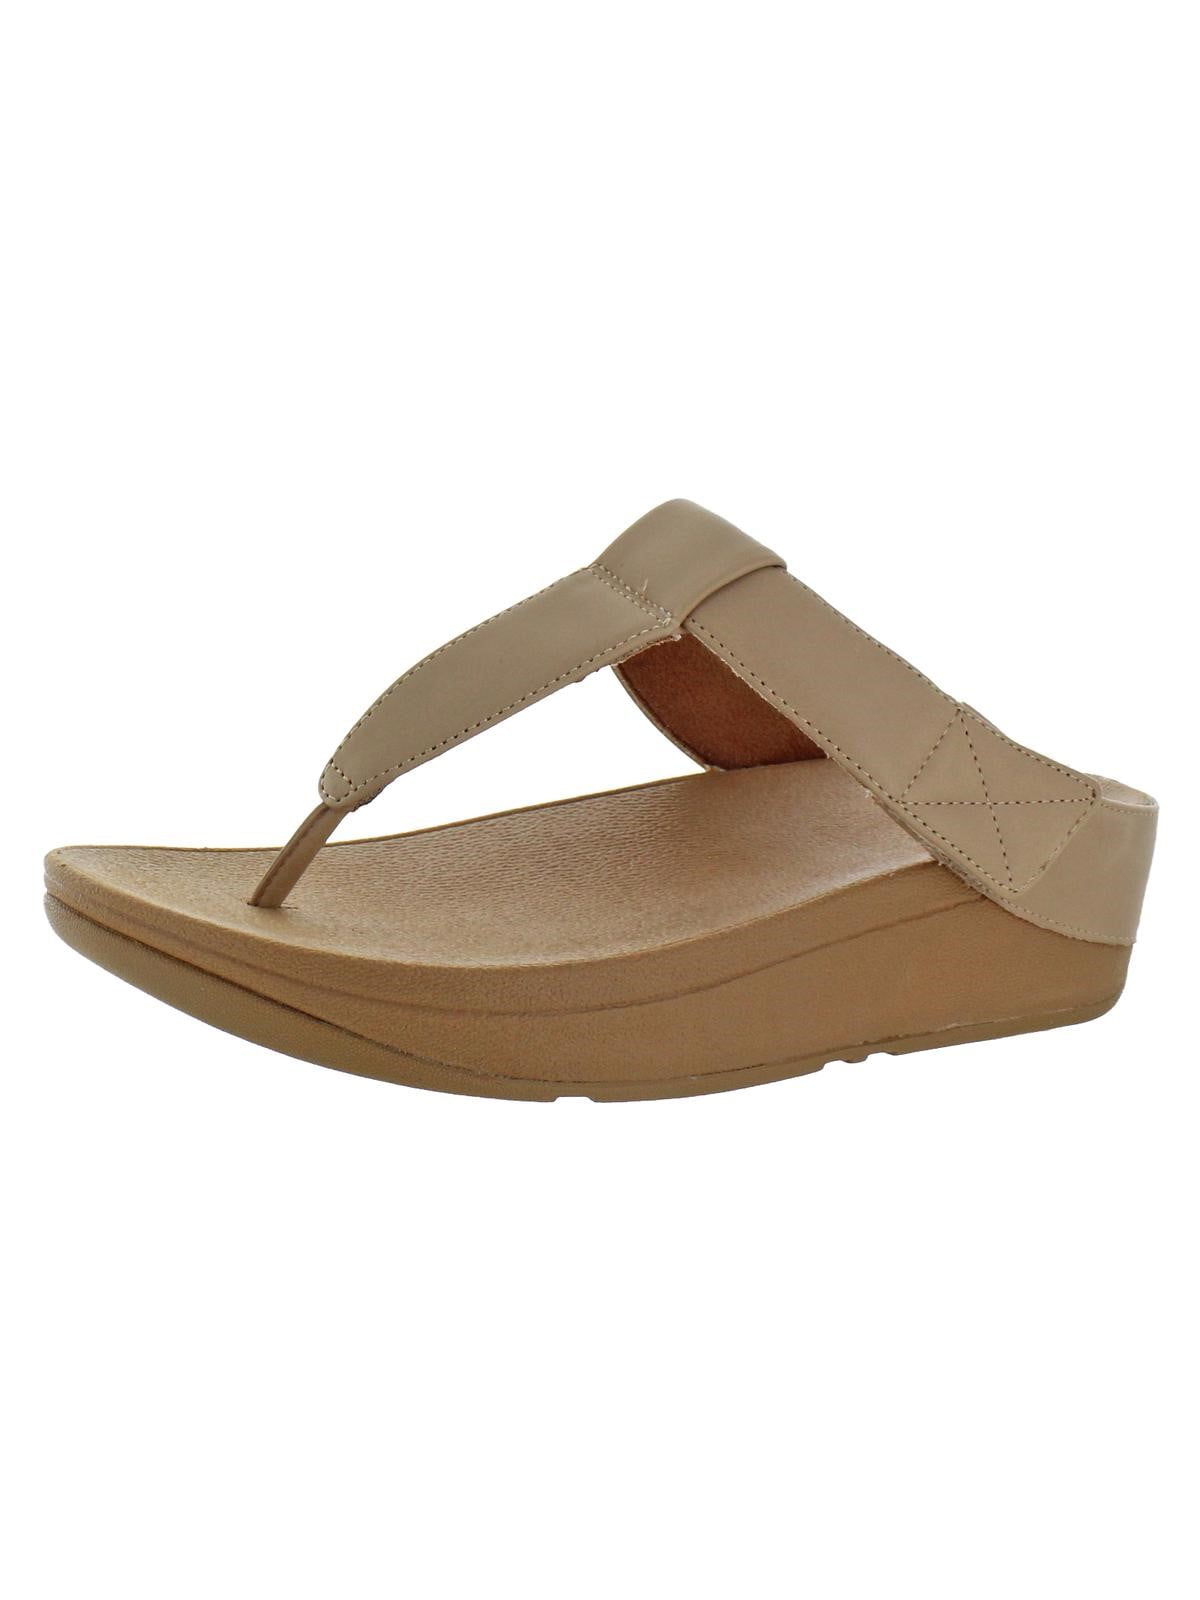 FitFlop Women's Mina Leather Dual Strap 